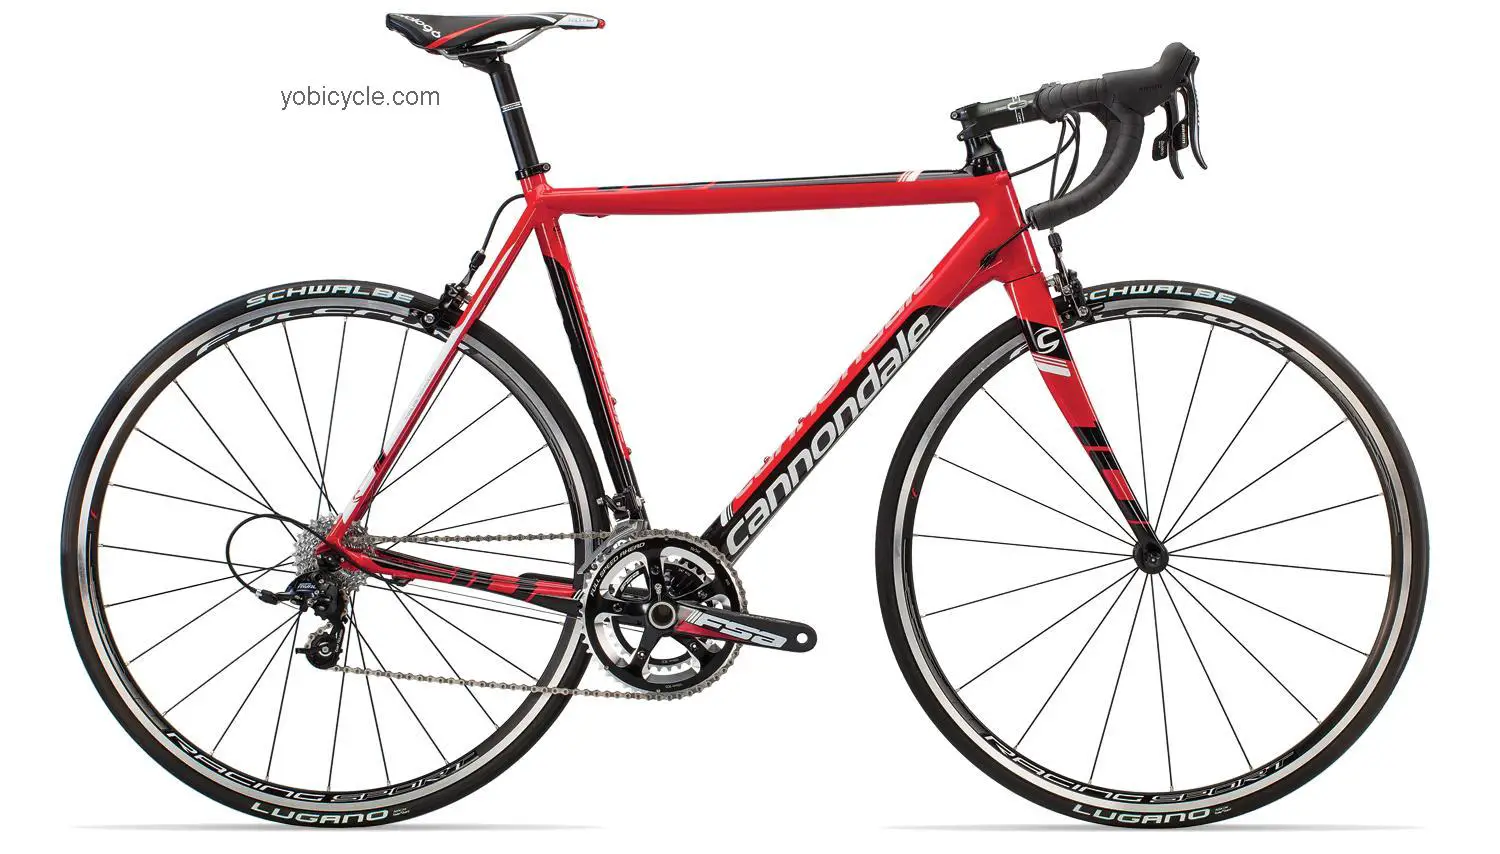 Cannondale CAAD10 4 Rival 2014 comparison online with competitors